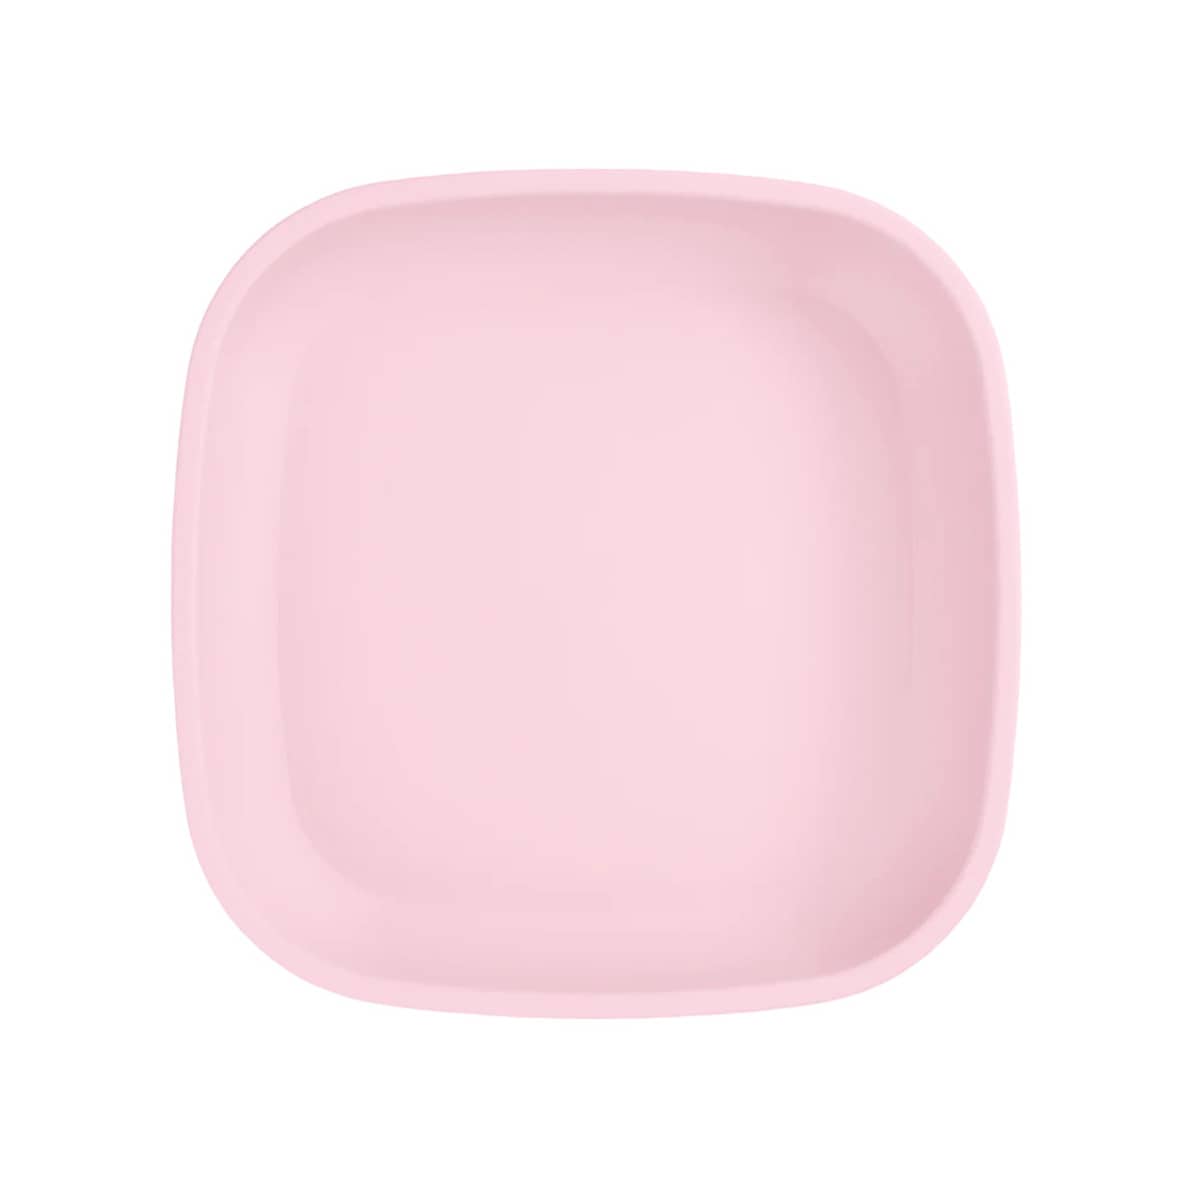 Re-Play Recycled Flat Plate - Ice Pink